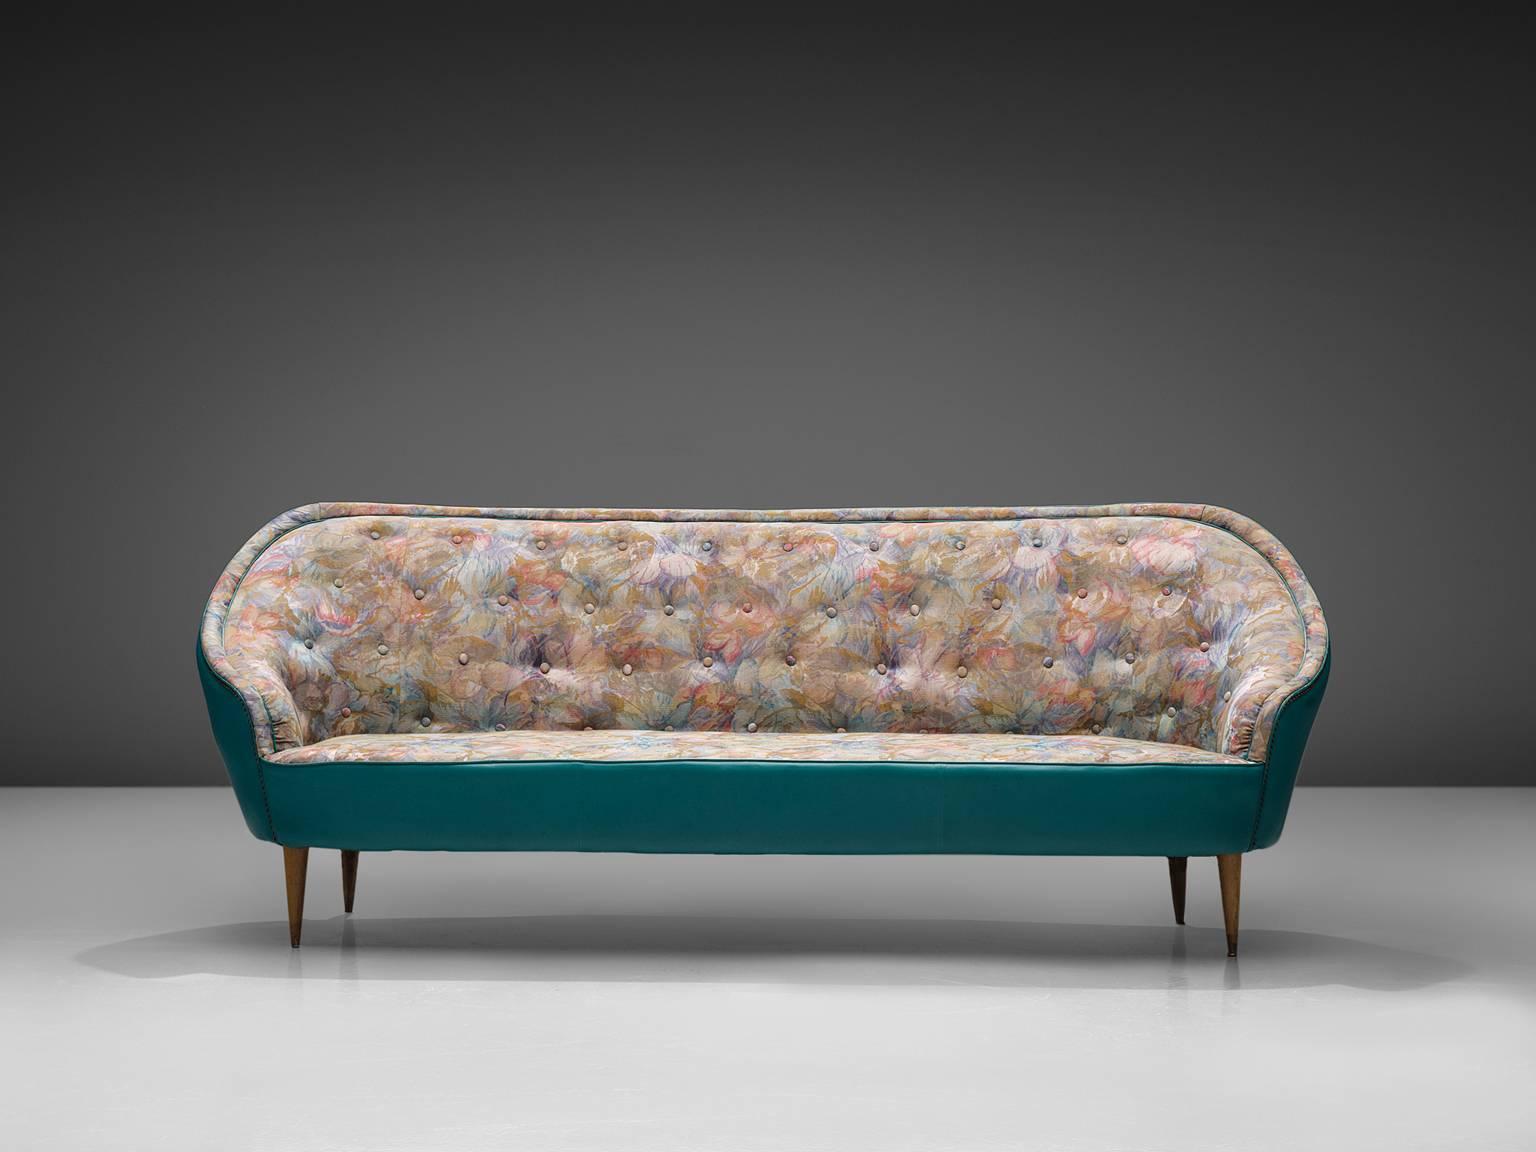 Sofa, turquoise leatherette, fabric, wood, Italy, 1950s.

This sofa show traits of the design by the Italian designer Veronesi. The sofa is elegant and bulky and is completely rounded when seen from behind. The piece features a rounded, buttoned